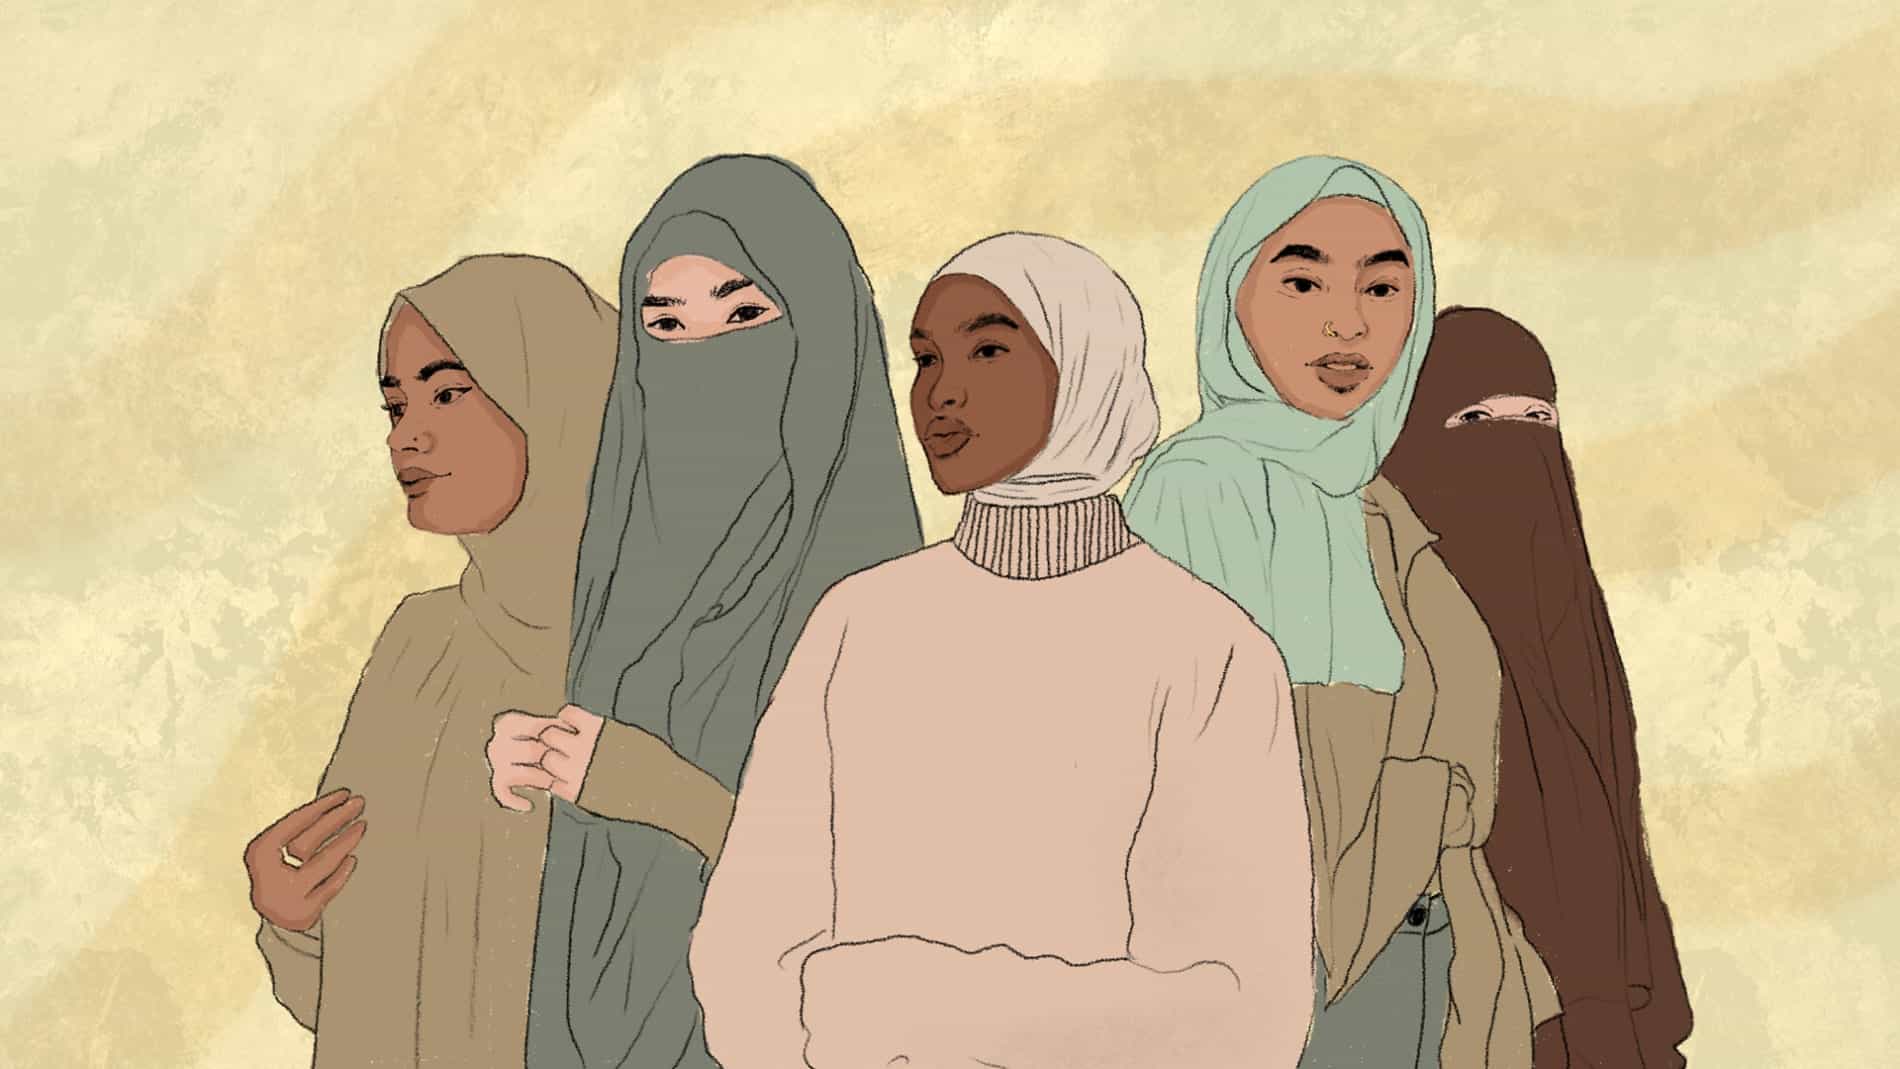 When can a woman take off her hijab?